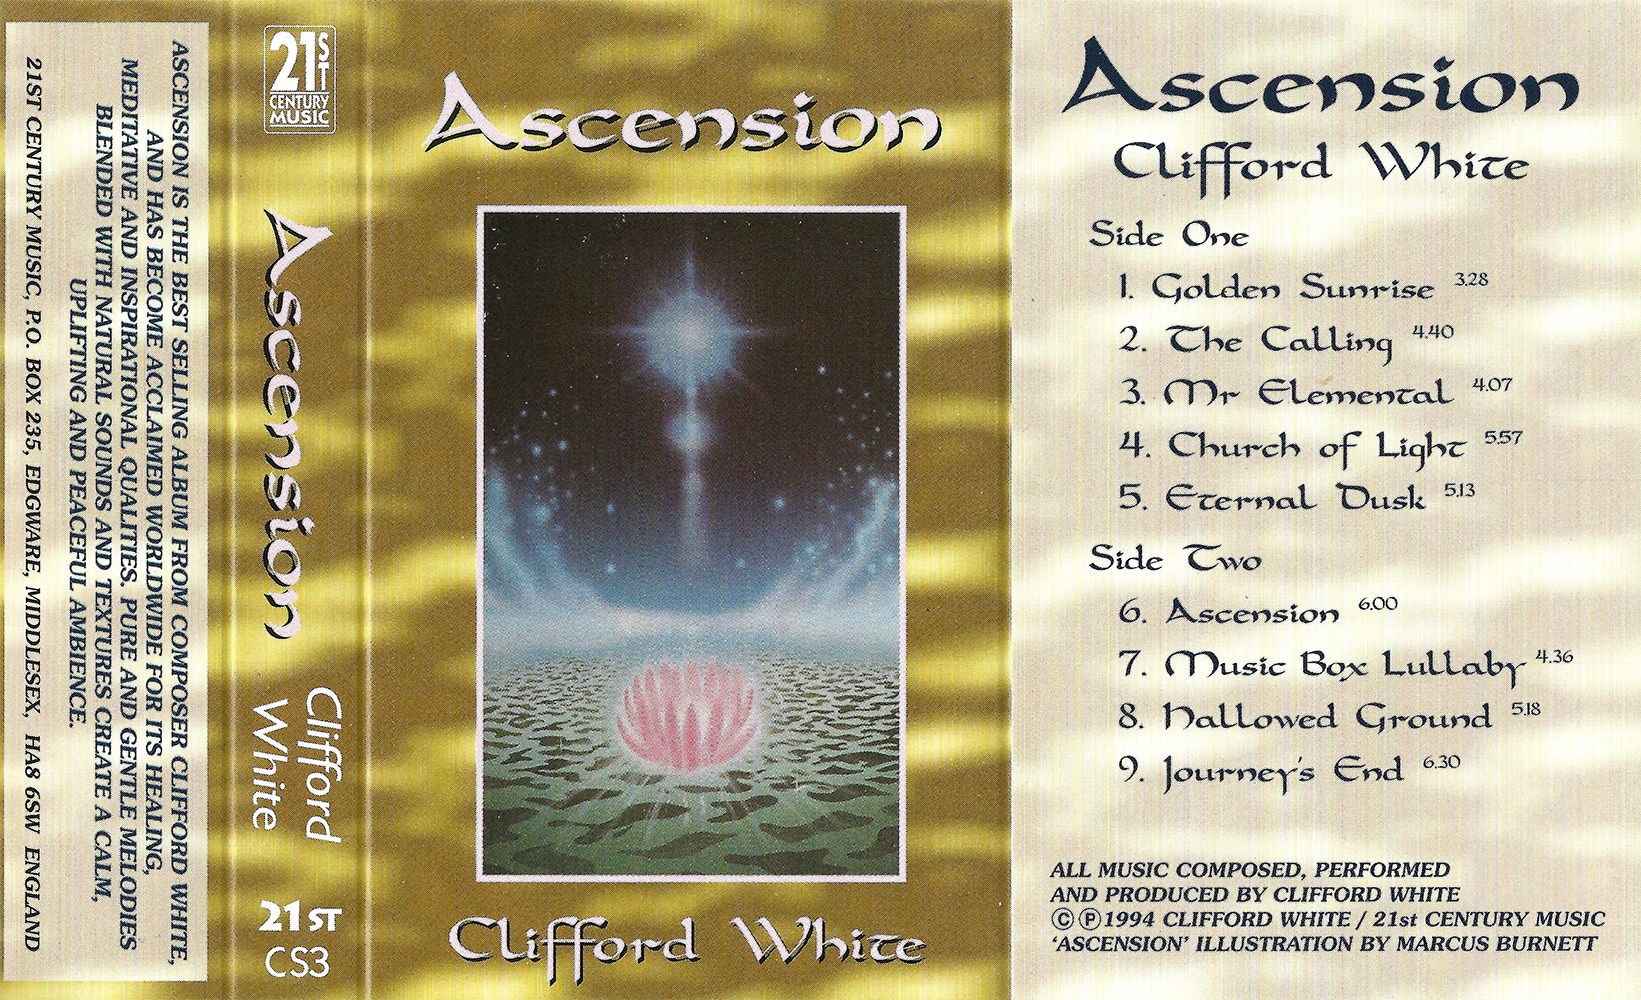 Ascension by Clifford White